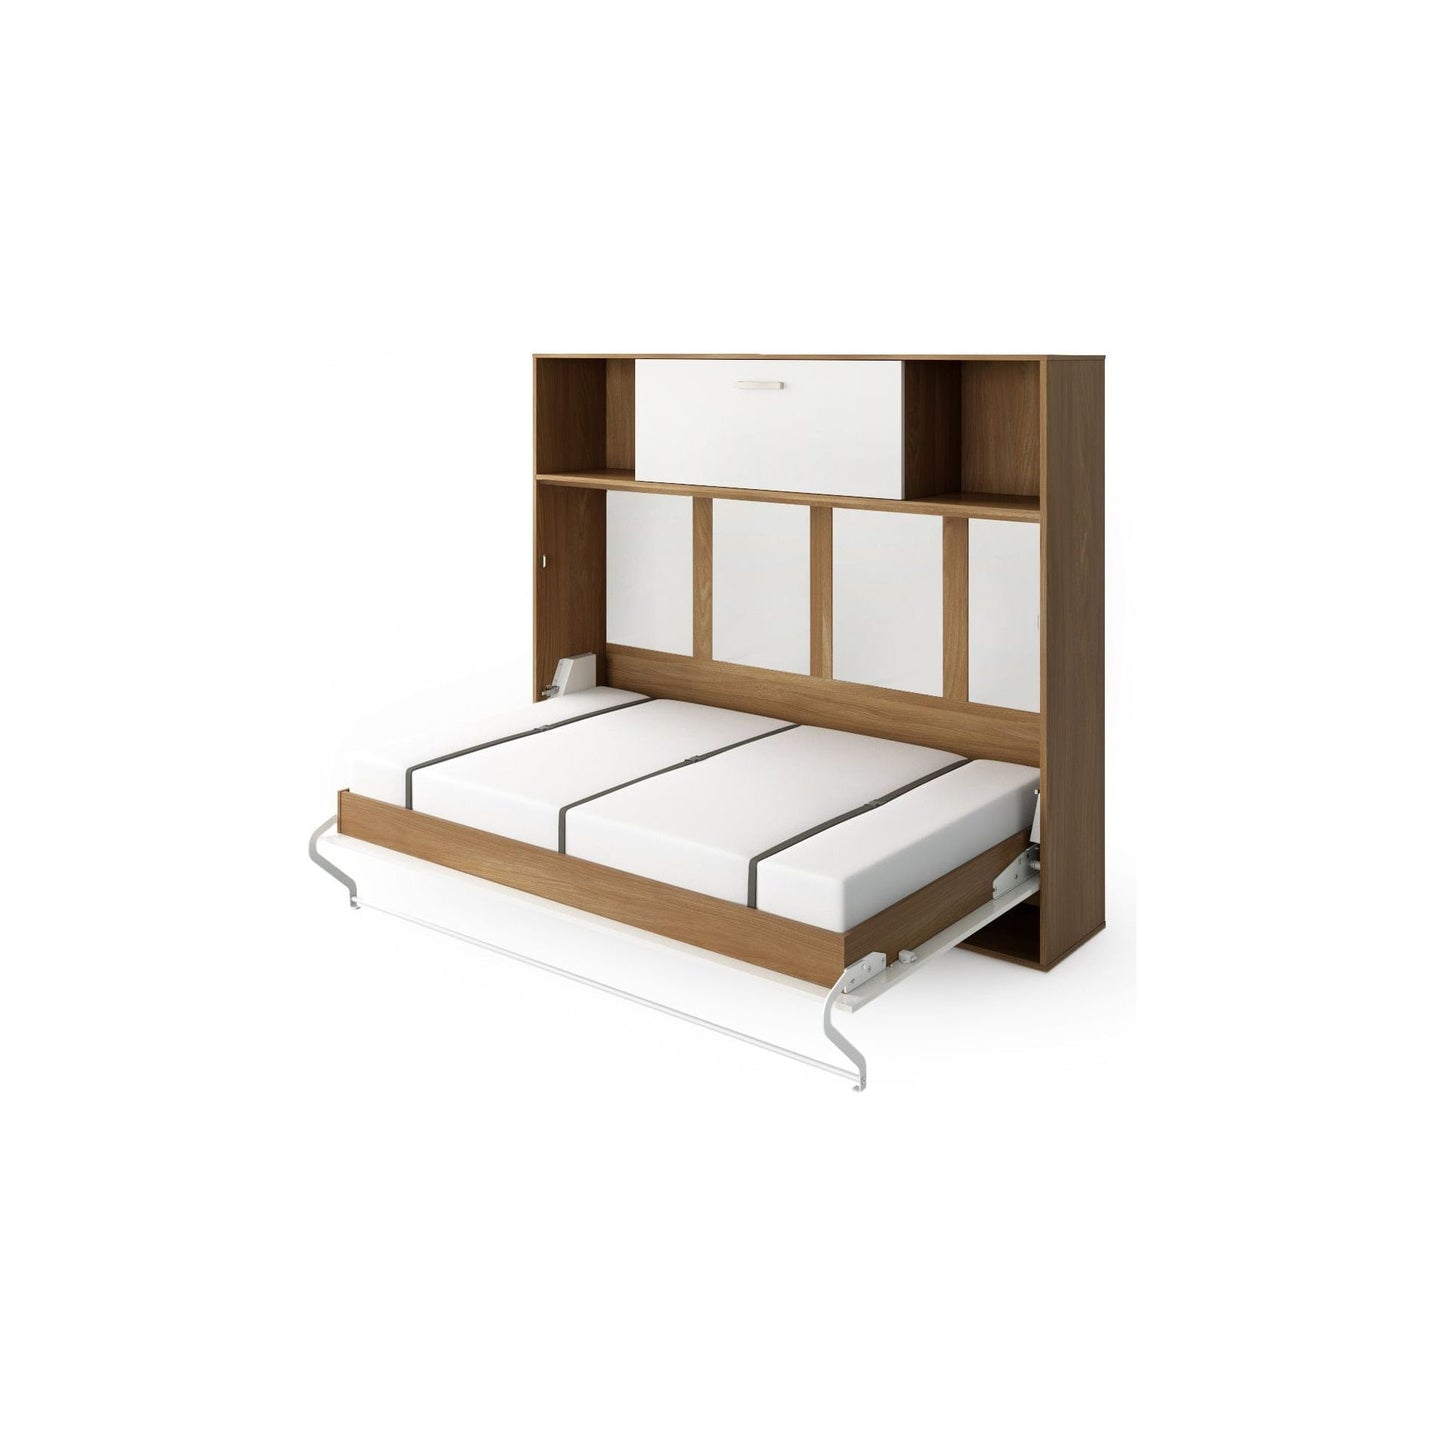 Maxima House Invento Horizontal Wall Bed, European Twin Size with a cabinet on top